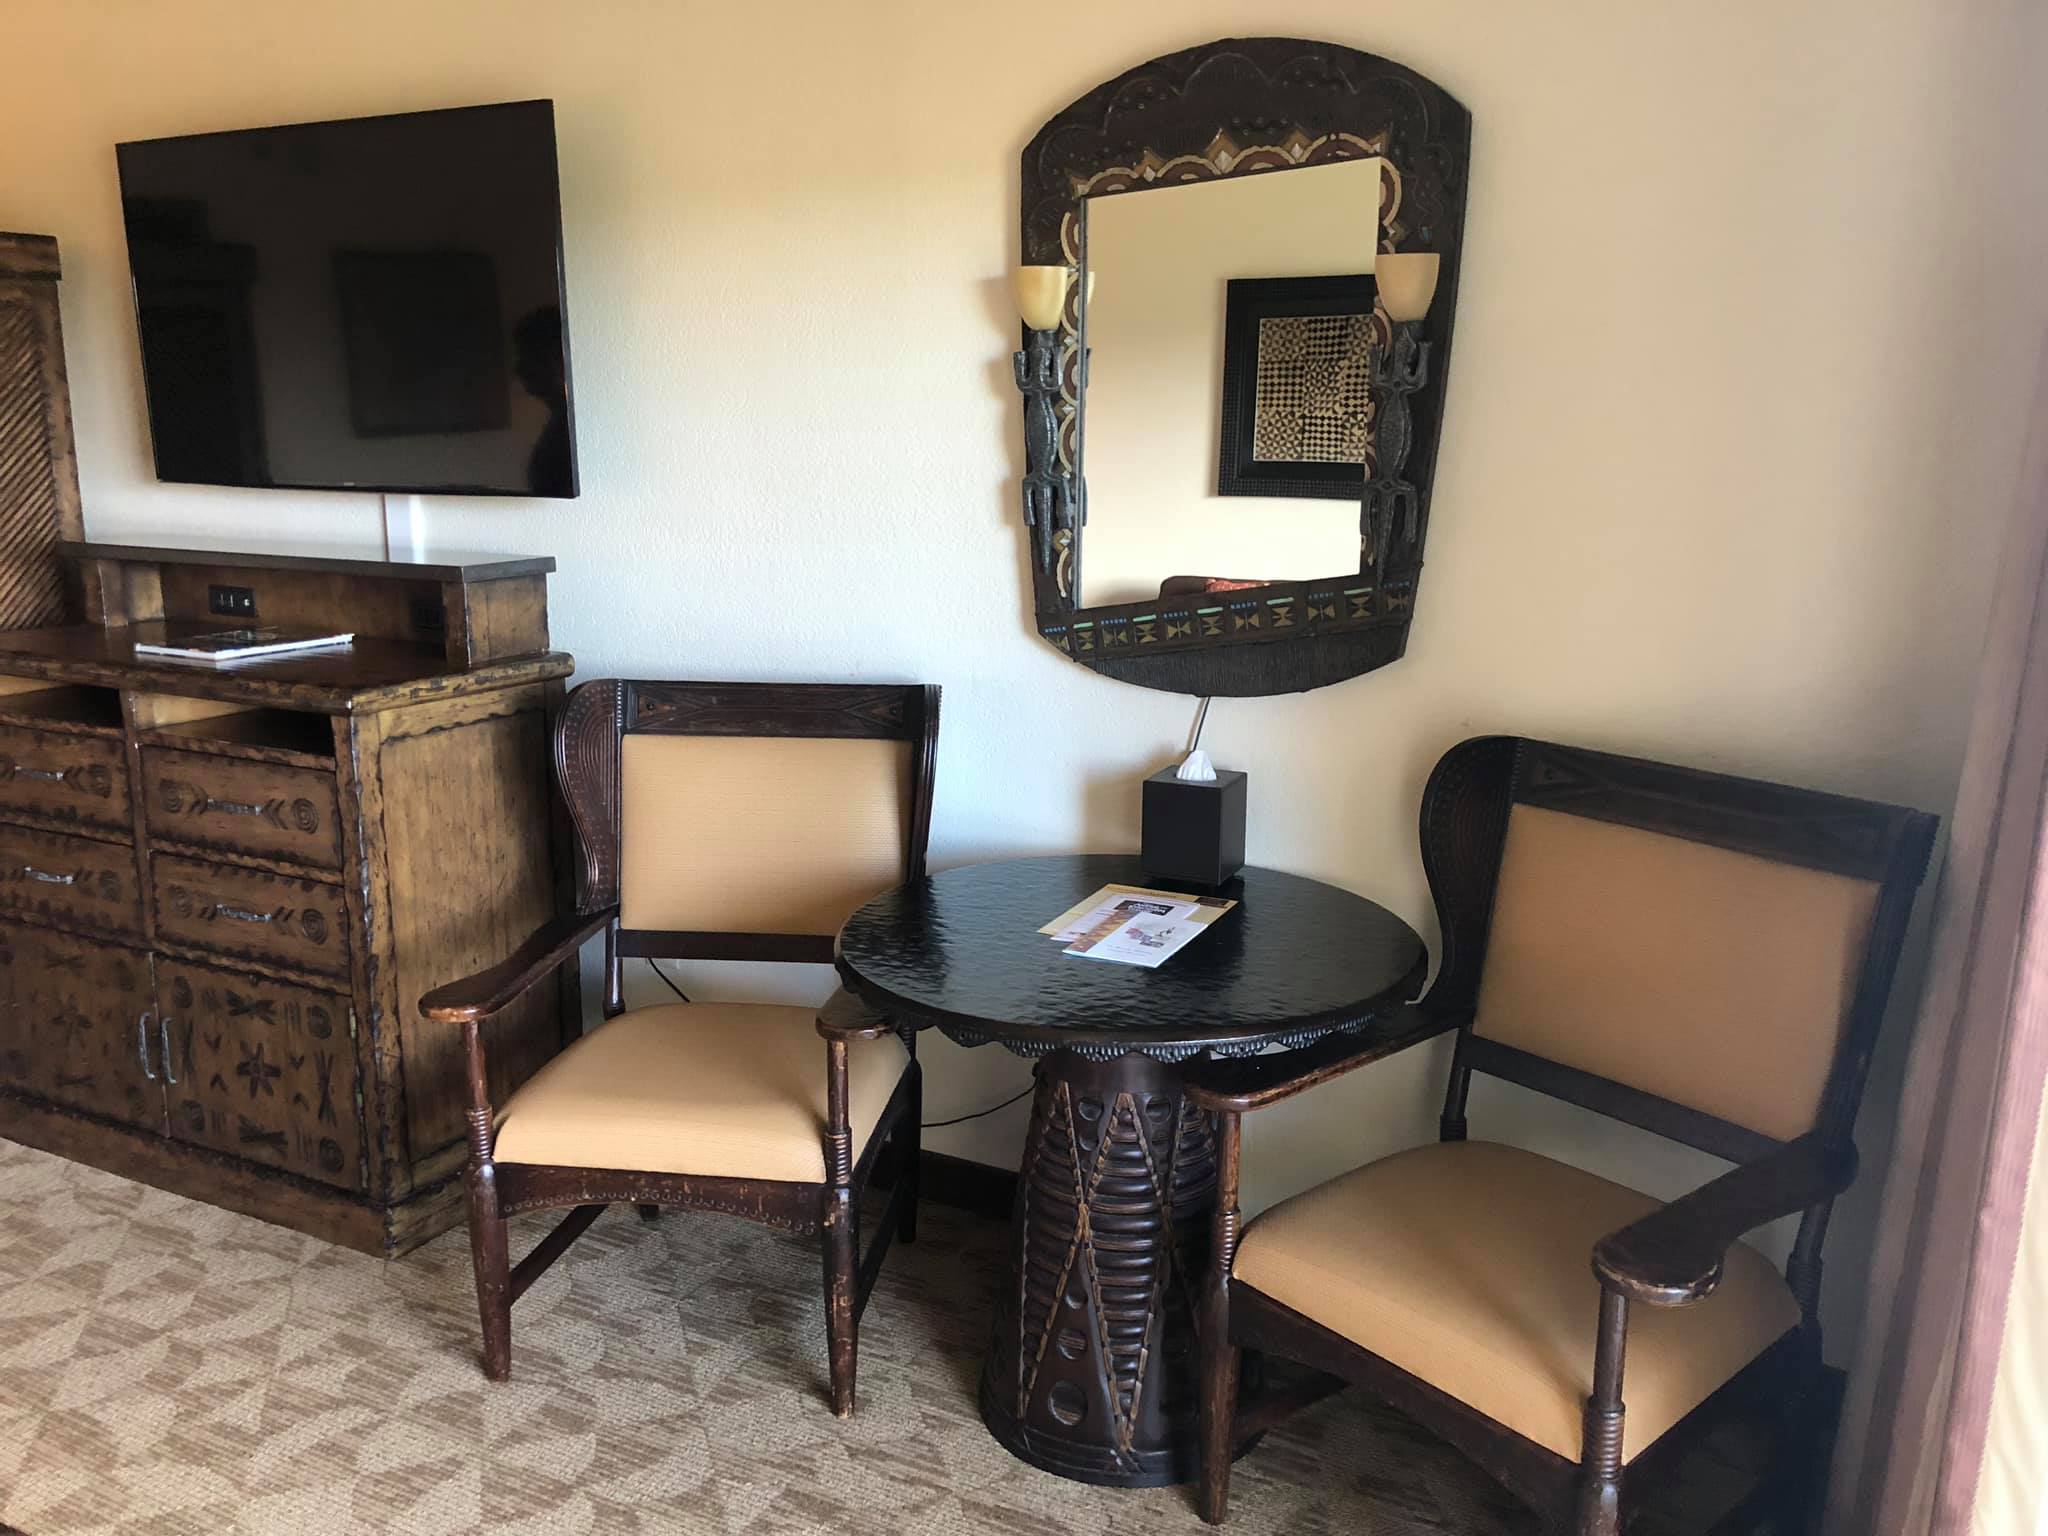 Animal Kingdom Villas | A Table With 2 Chairs and A Mirror Attached on the Wall